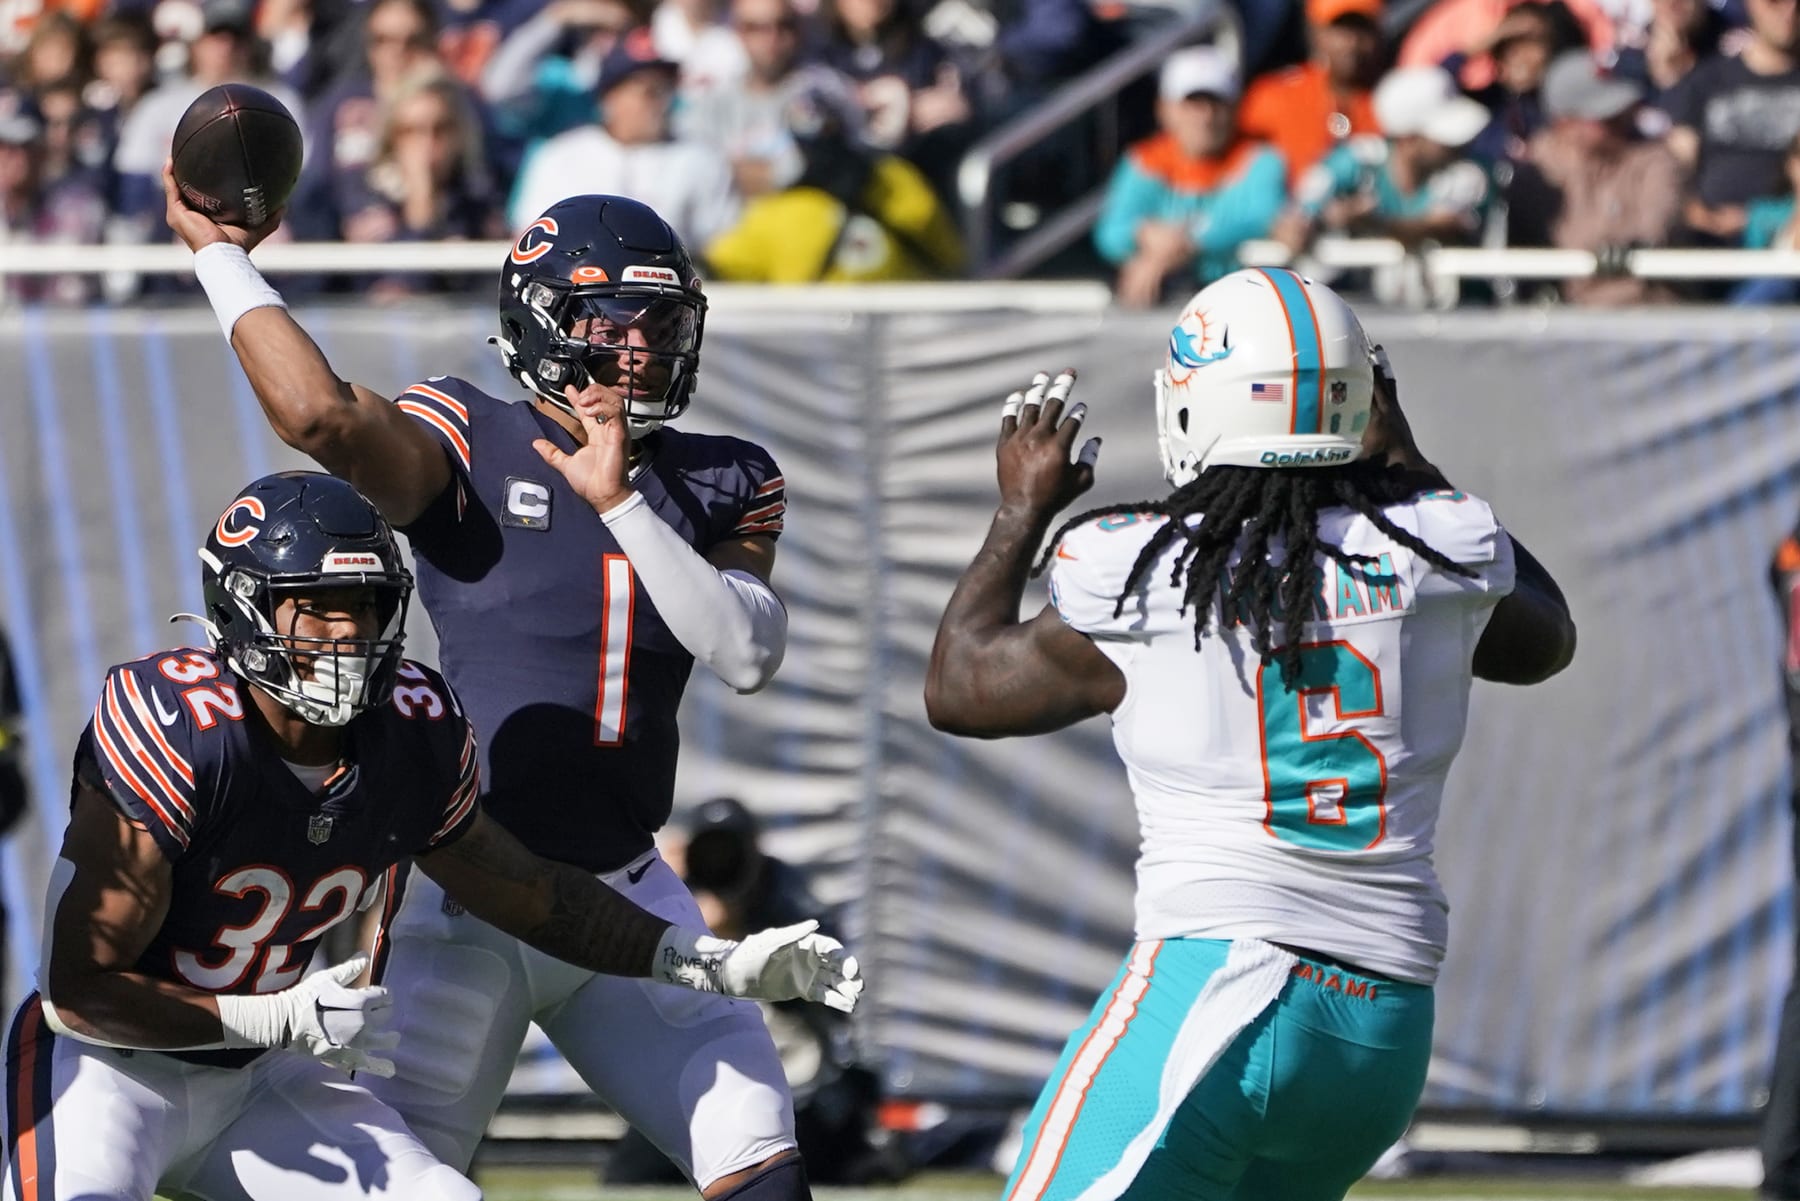 Takeaways from Miami Dolphins' 35-32 win vs. Chicago Bears